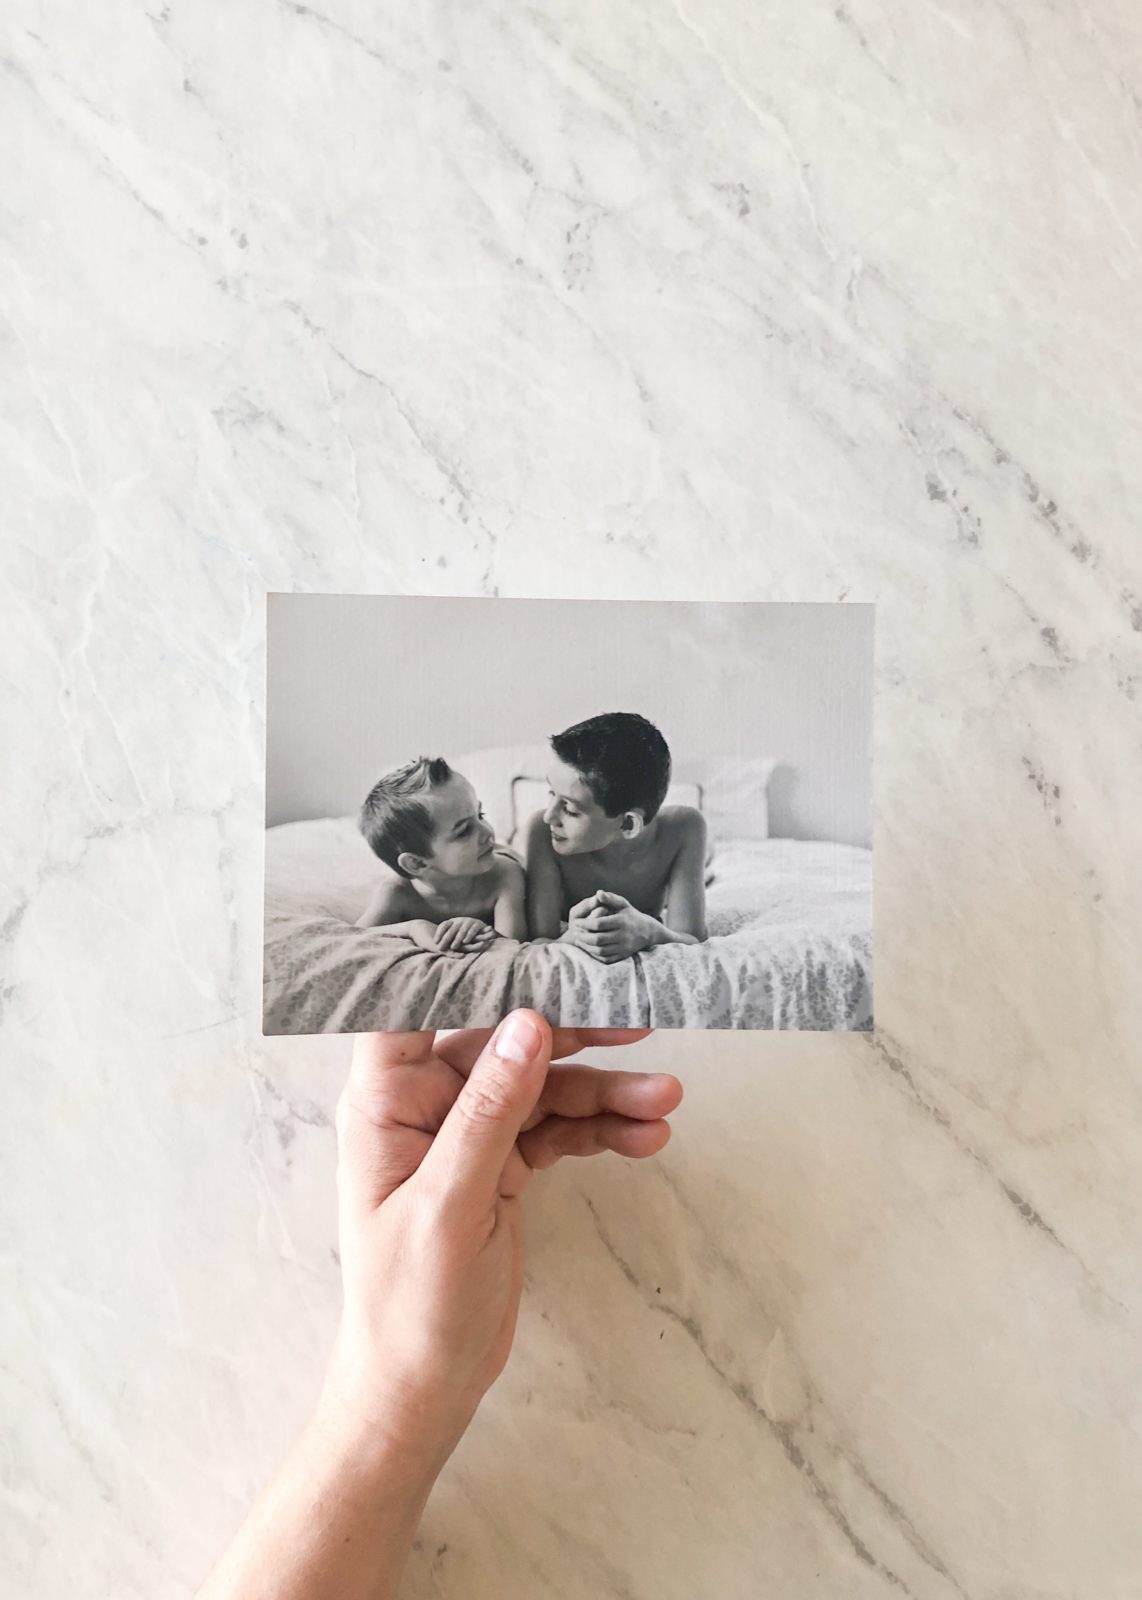 The importance of printed photographs and why technology has made us forget how important it is! Catch the whole discussion on Haus of Layne! #Photography #PrintedPhotographs #Photographs #FamilyPhotography #MemoryKeeping #Scrapbooking